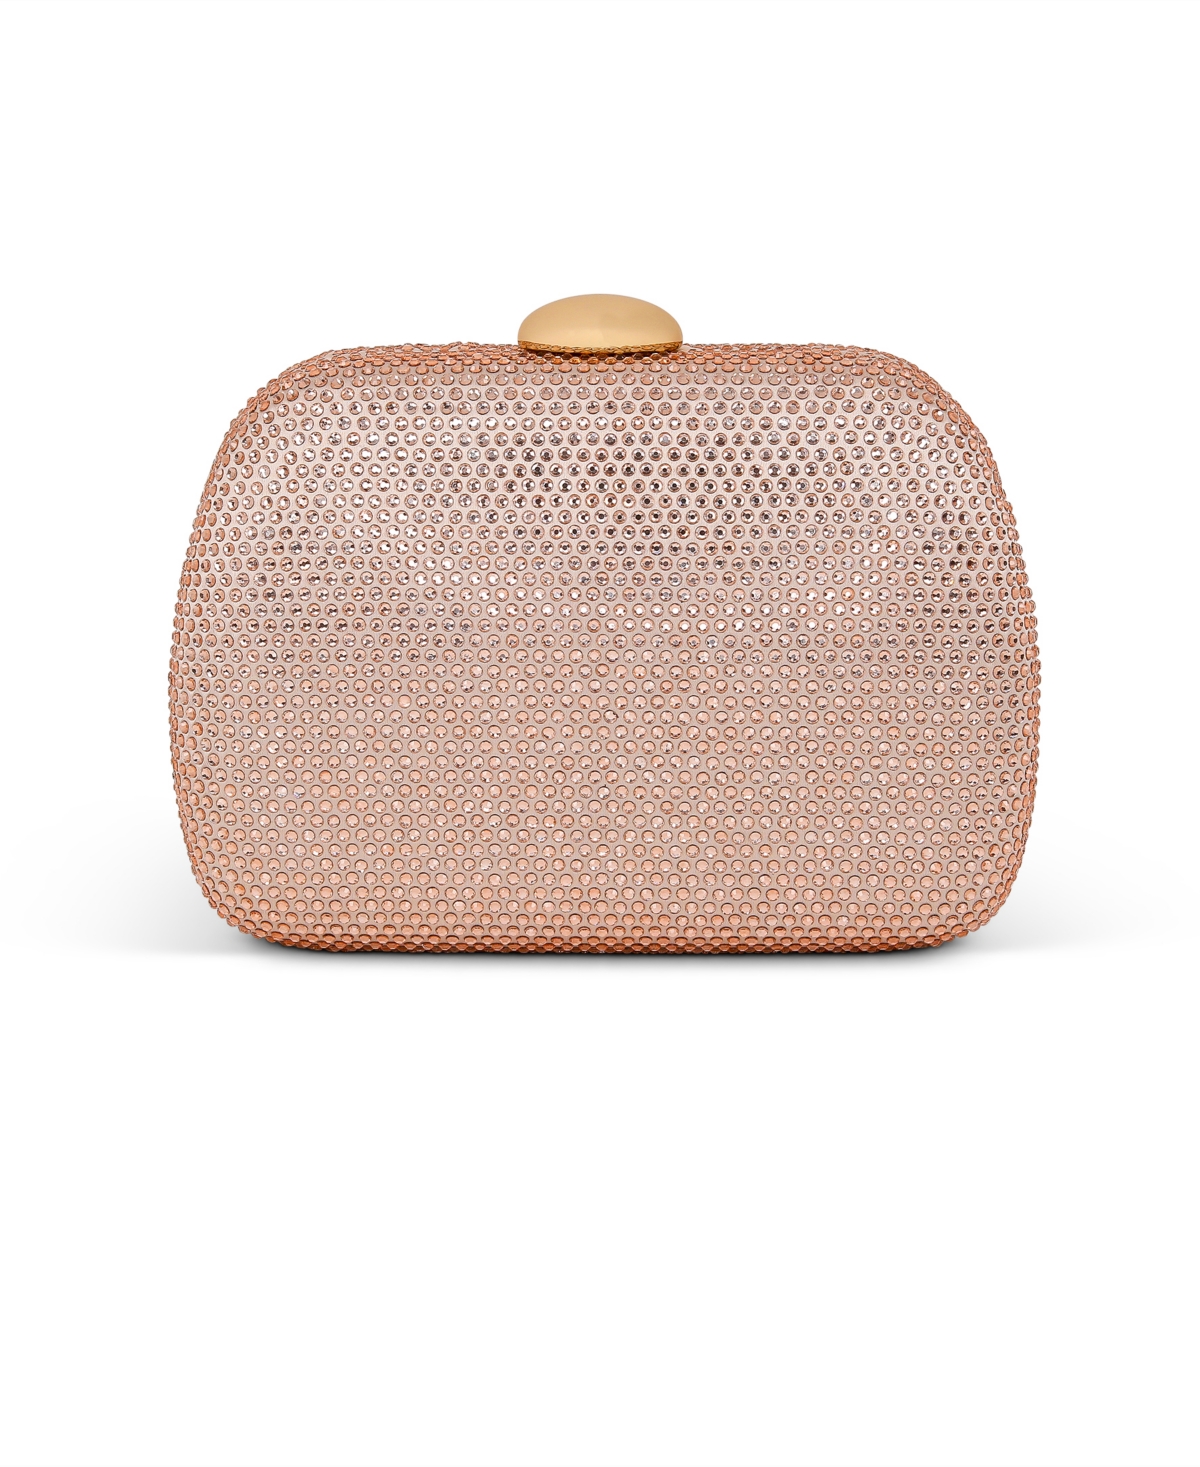 Woman's Blossom Crystal Minaudiere - Neon pink